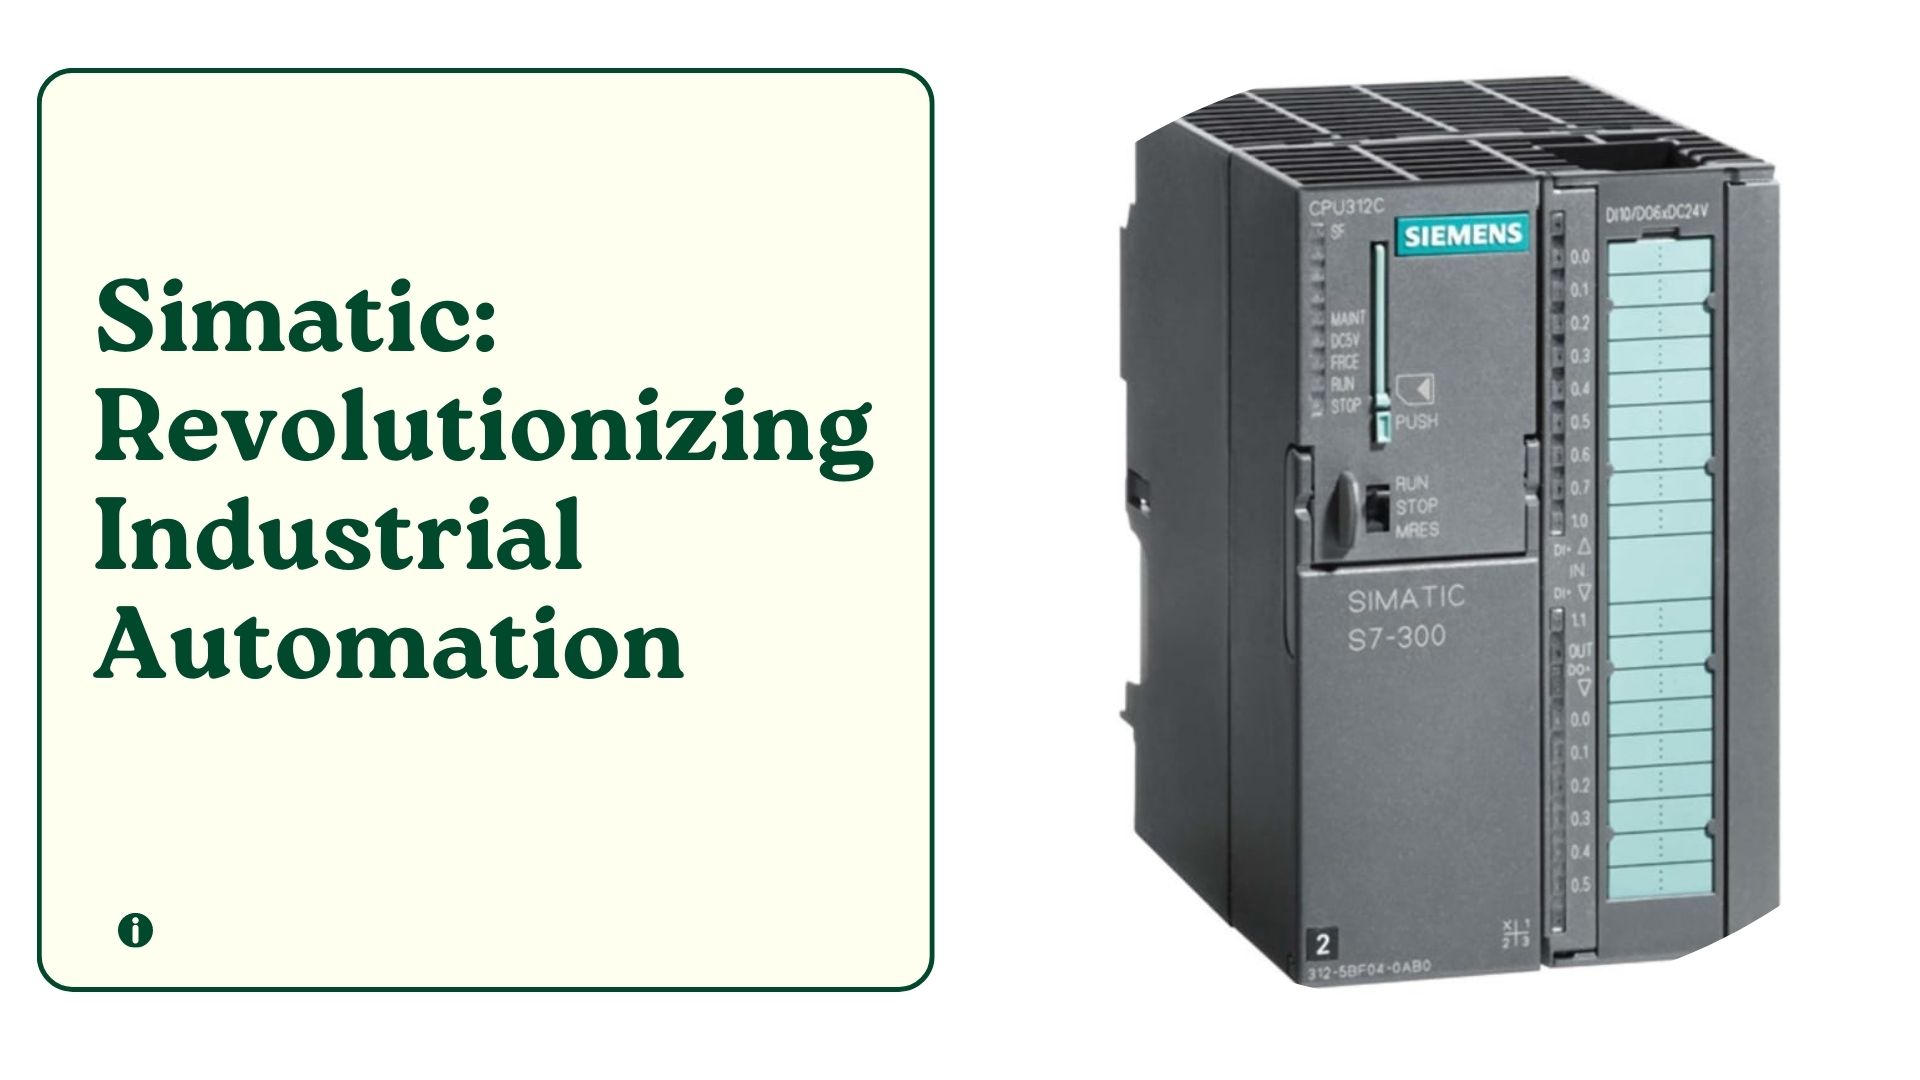 Simatic: Revolutionizing Industrial Automation